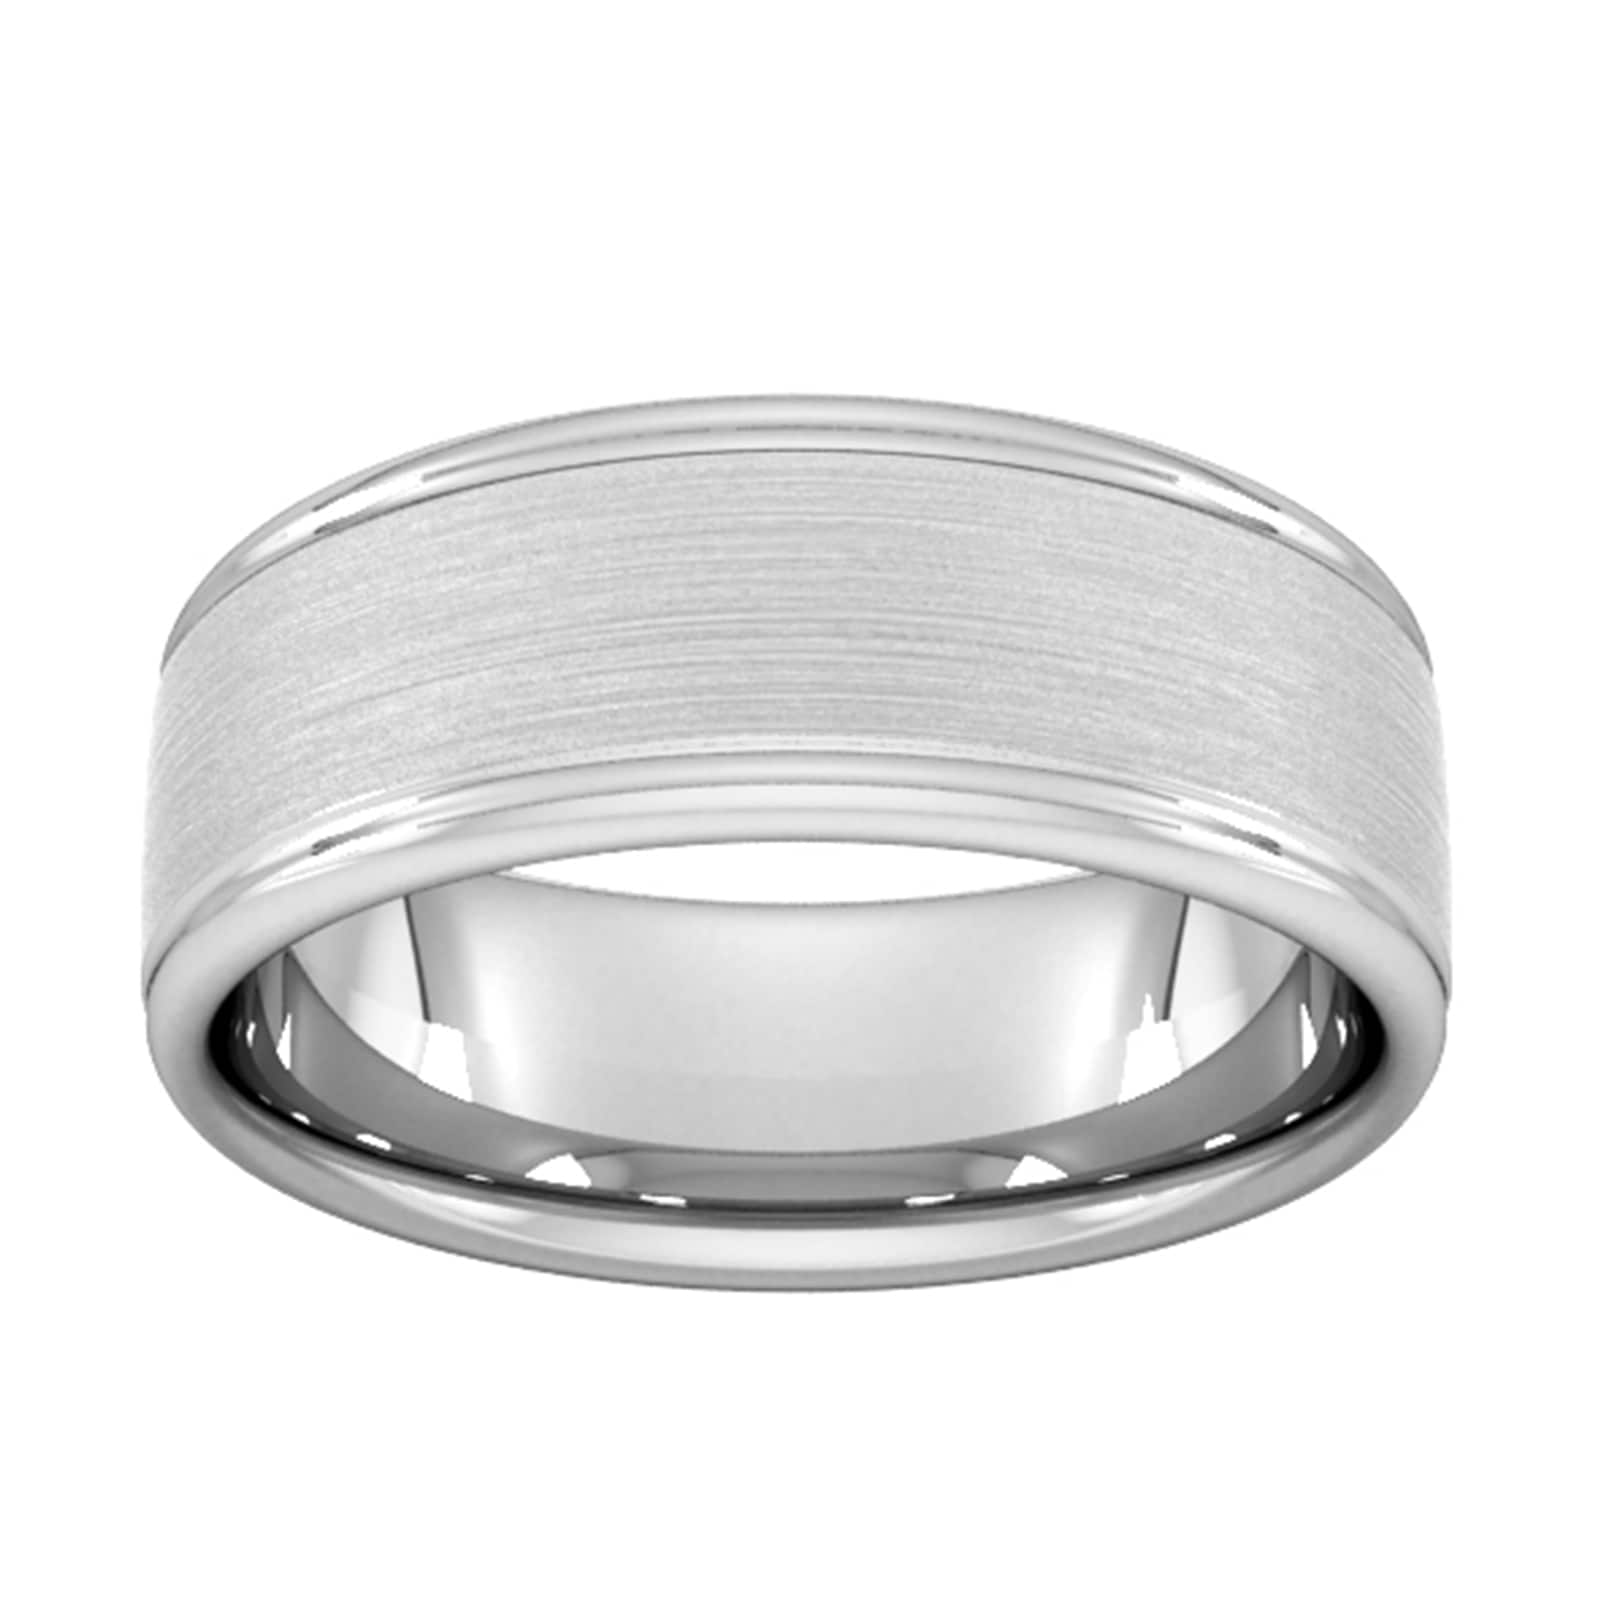 8mm Flat Court Heavy Matt Centre With Grooves Wedding Ring In 9 Carat White Gold - Ring Size R